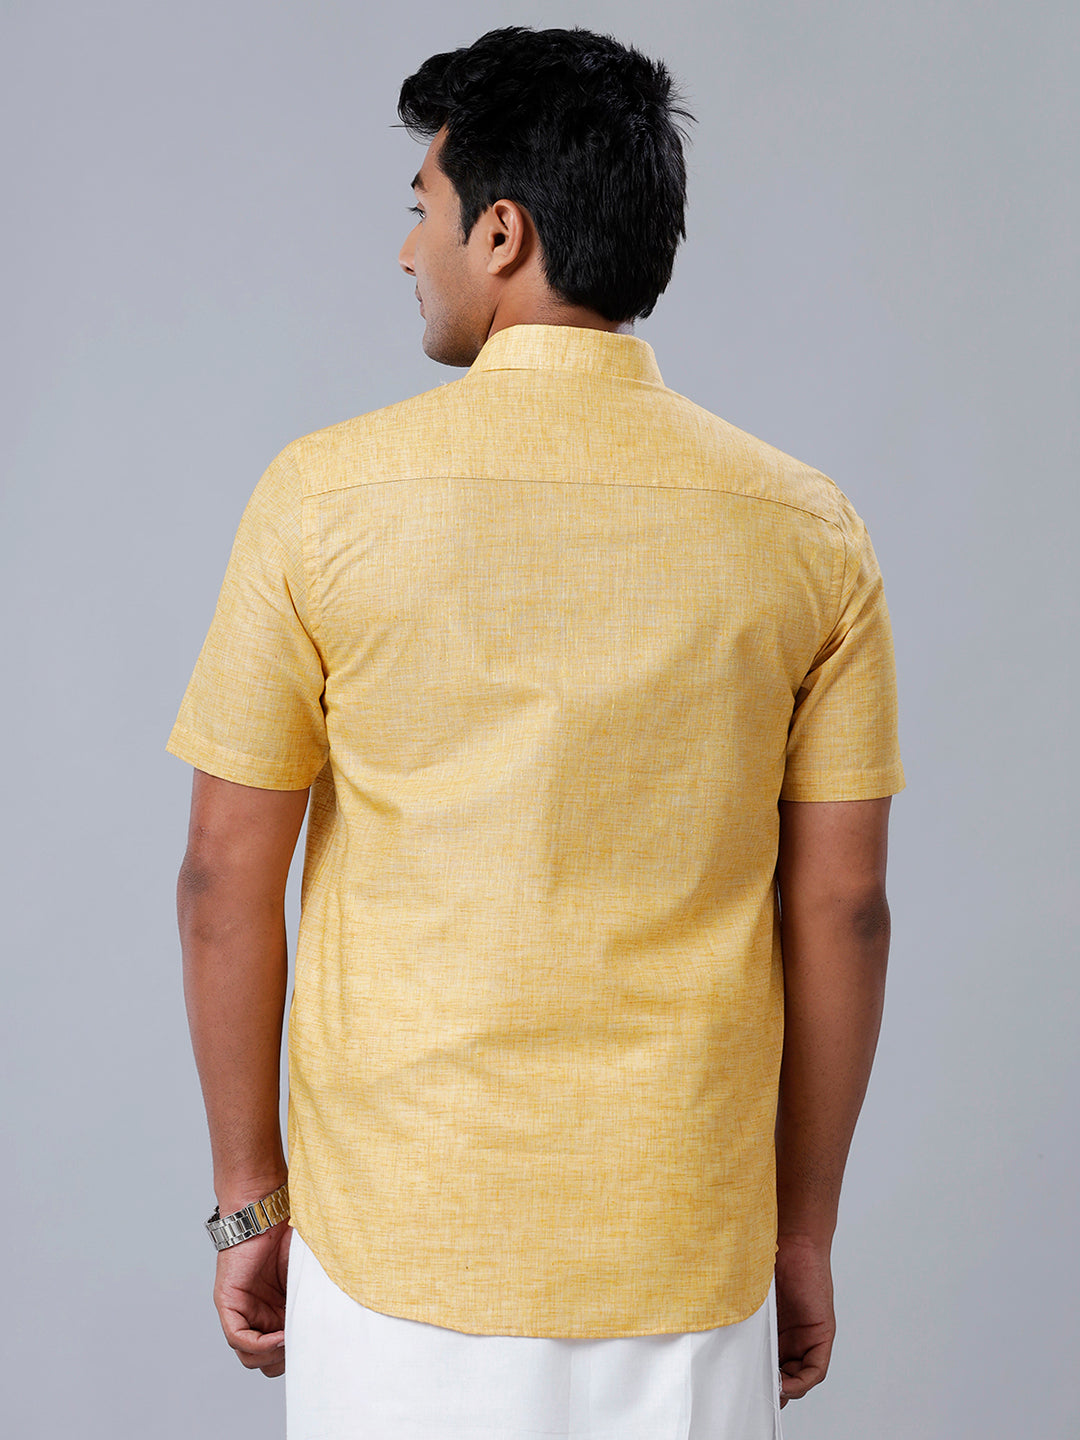 Mens Formal Shirt Half Sleeves Yellow T39 TO2-Back view